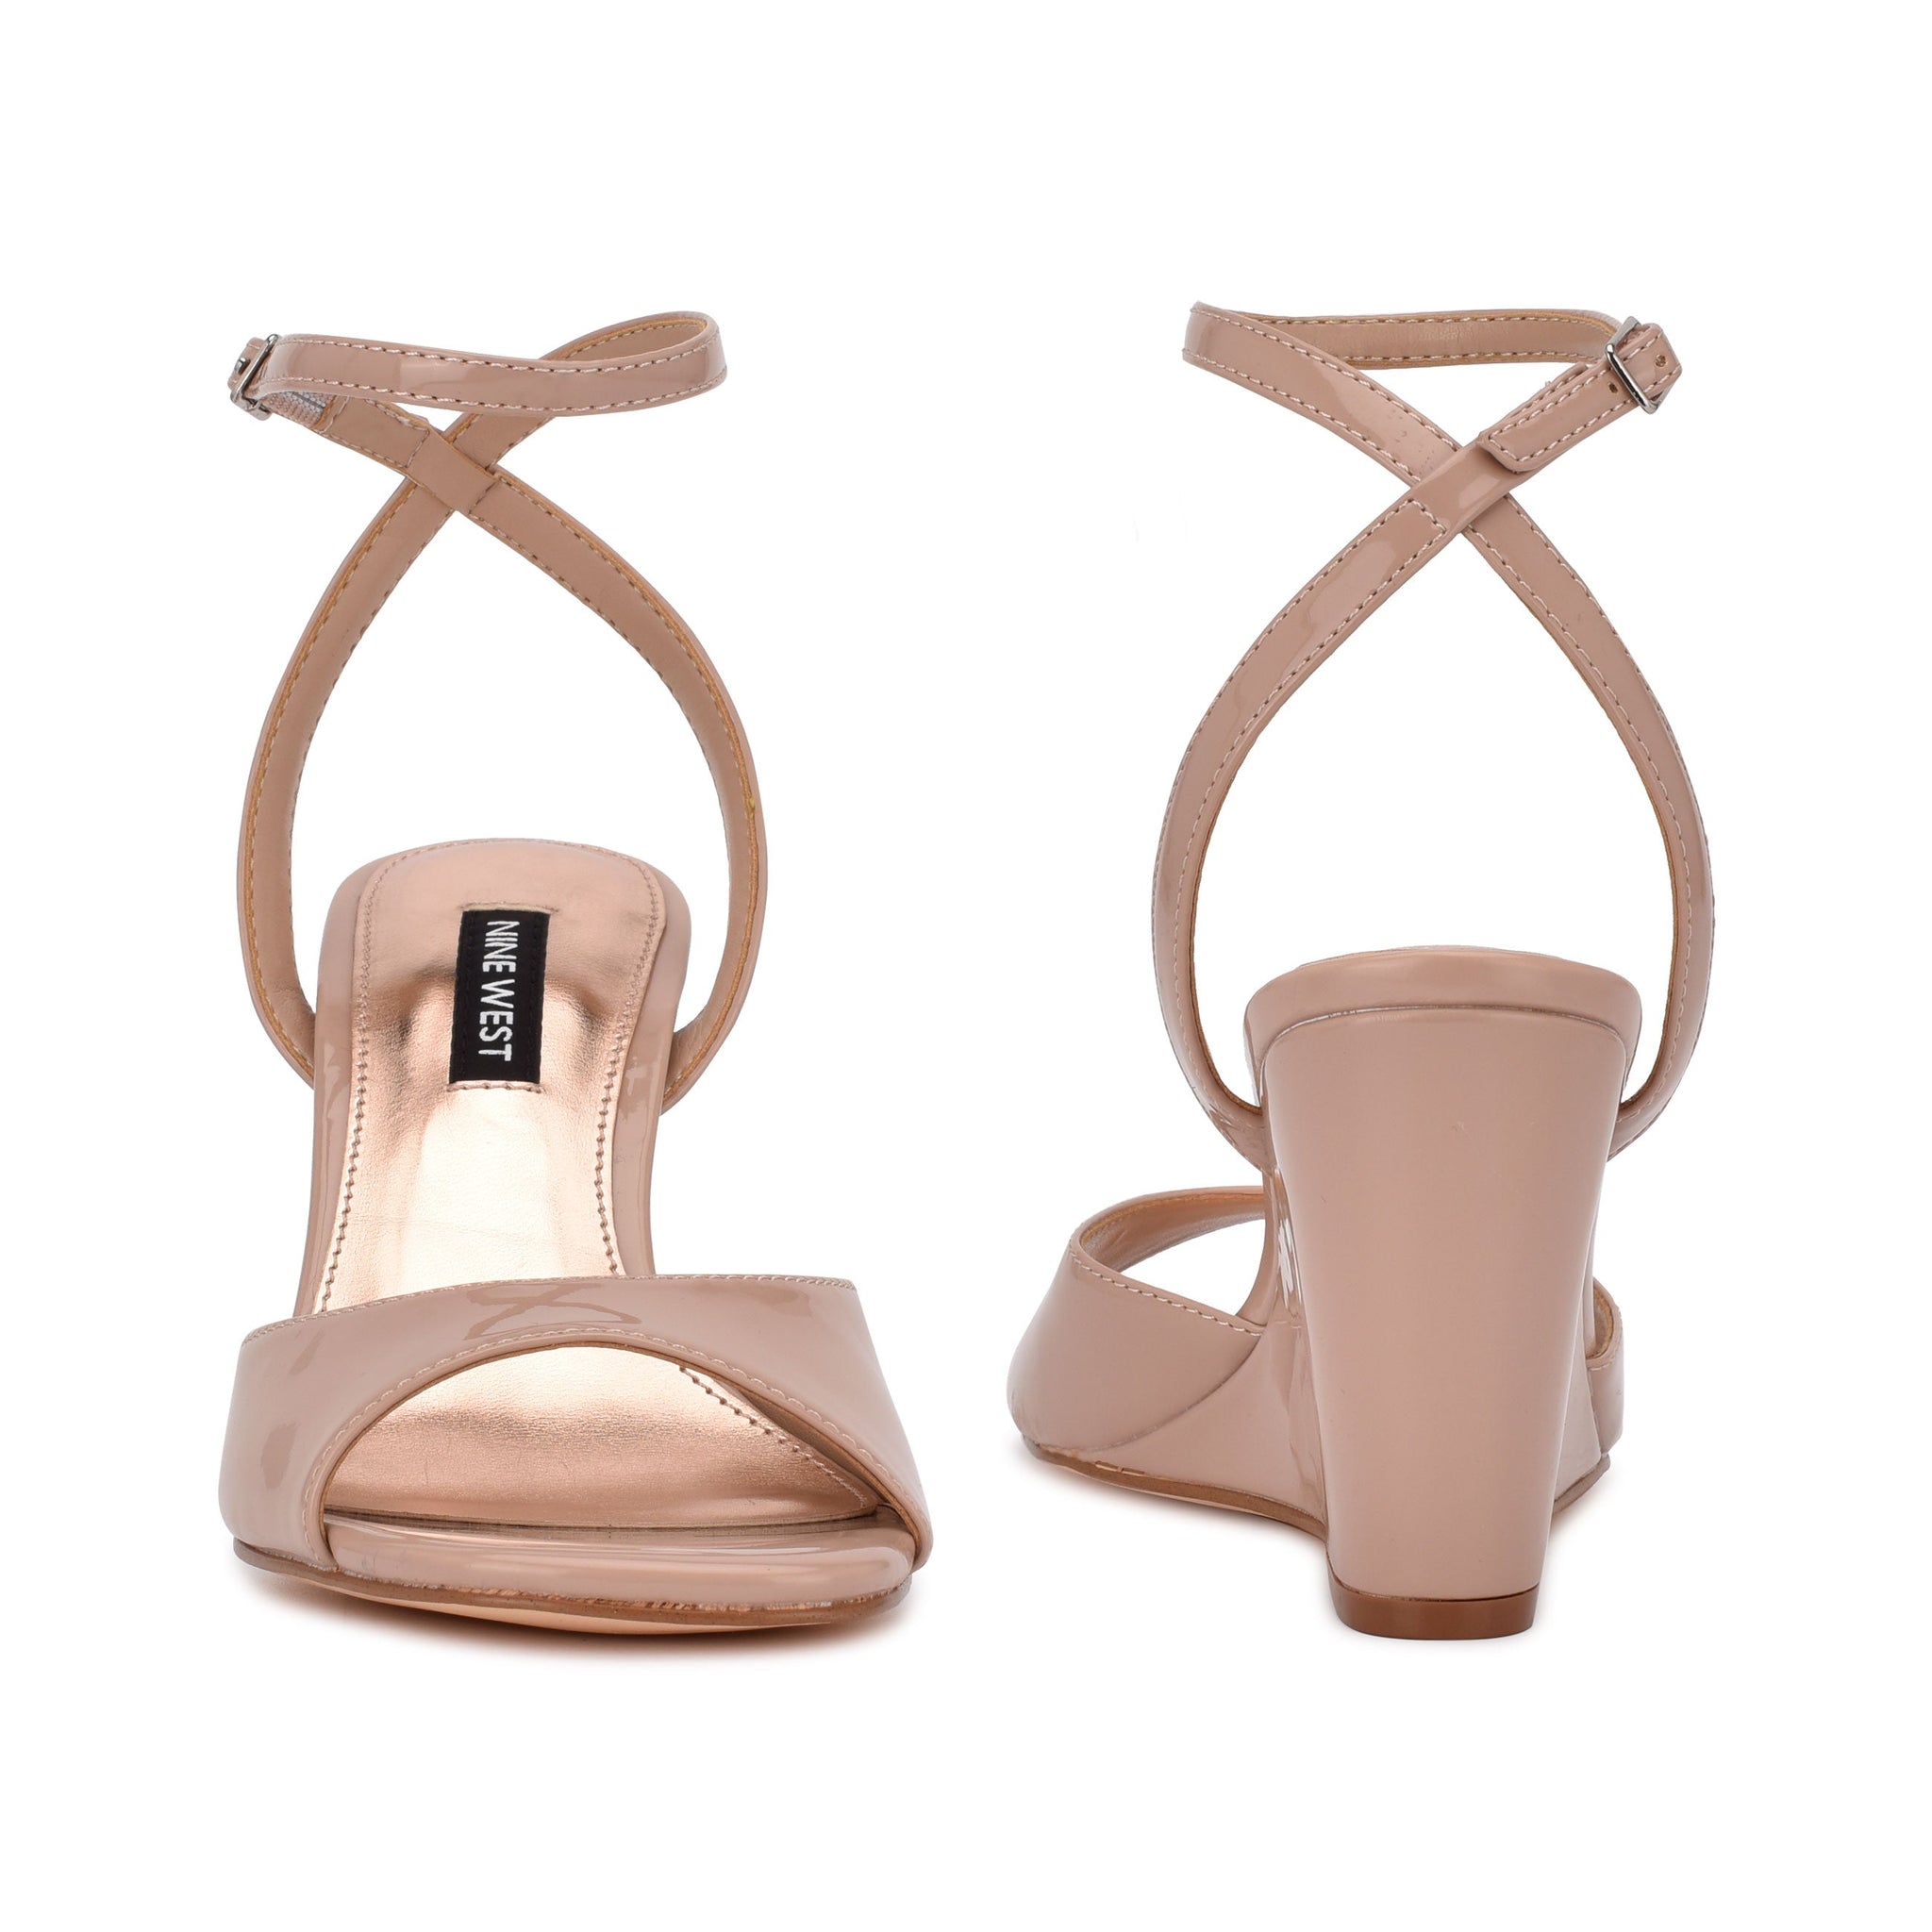 Ninewest- Nevr Ankle Strap Wedge Sandals (BARELY NUDE)